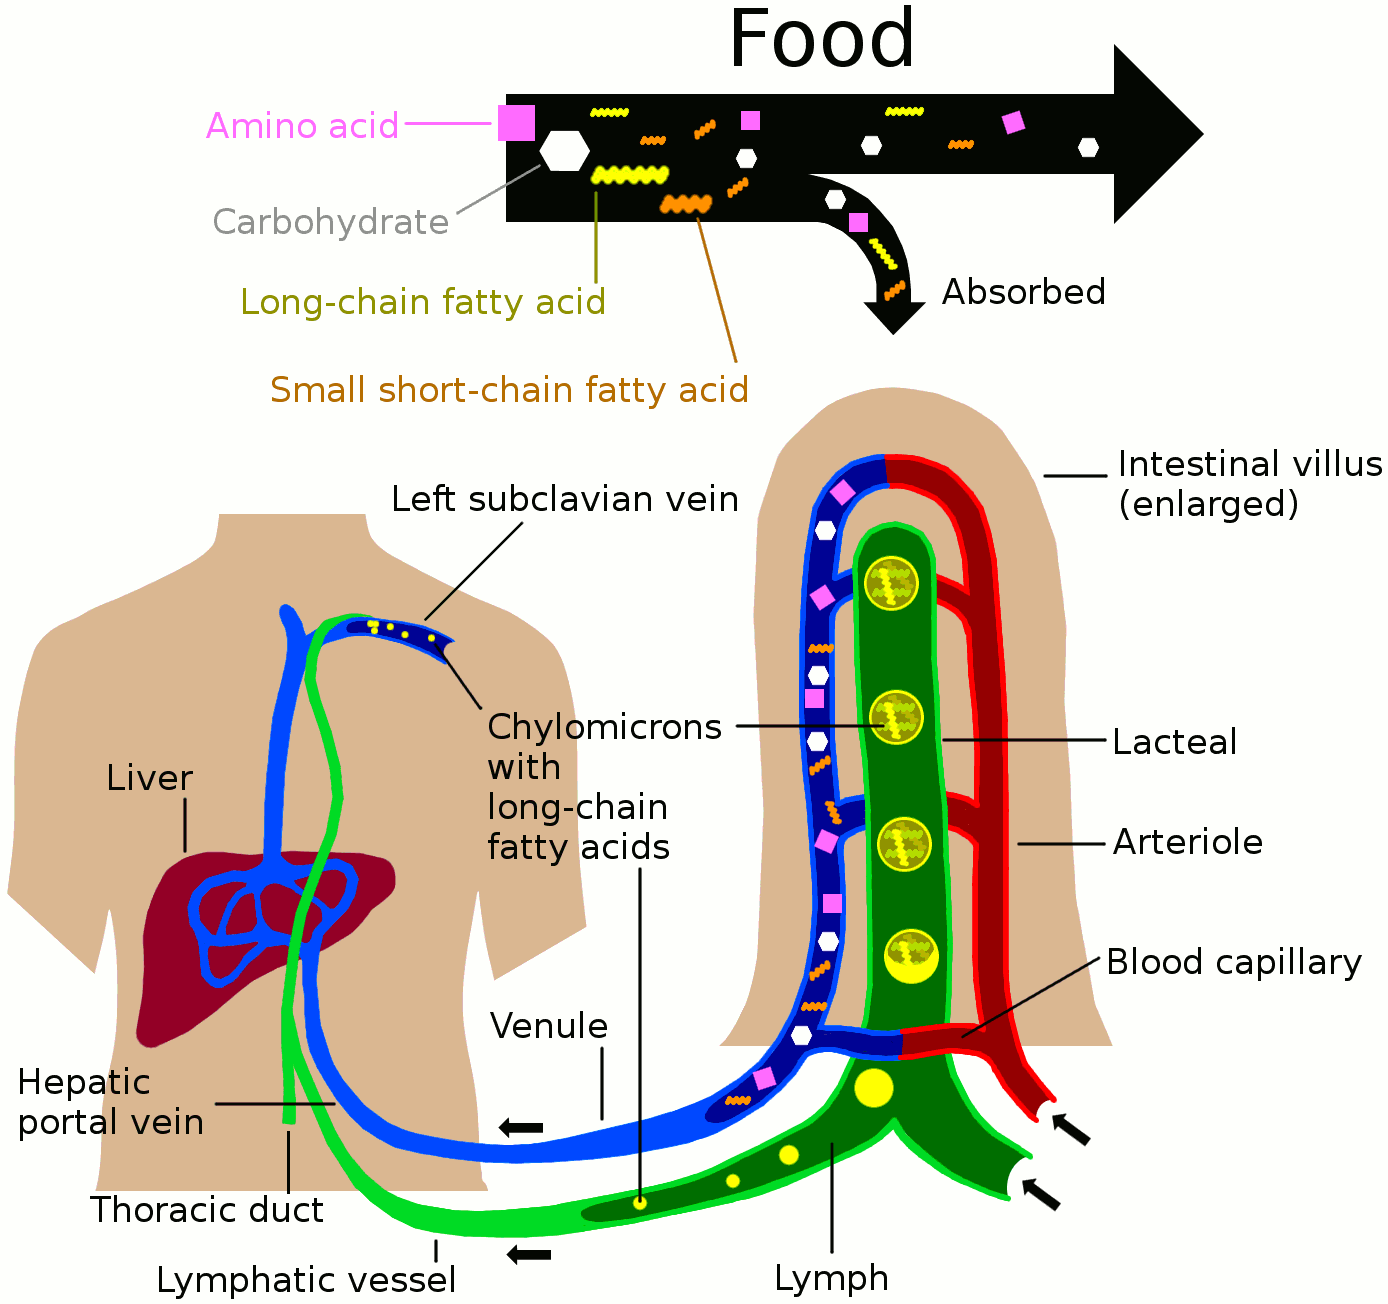 Nutrients in food are absorbed via intestinal vili (greatly enlarged in the picture) to blood and lymph. Long-chain fatty acids (and other lipids with similar fat solubility like some medicines) are absorbed to the lymph and move in it enveloped inside chylomicrons. They move via the thoracic duct of the lymphatic system and finally enter the blood via the left subclavian vein, thus bypassing the liver’s first-pass metabolism completely.